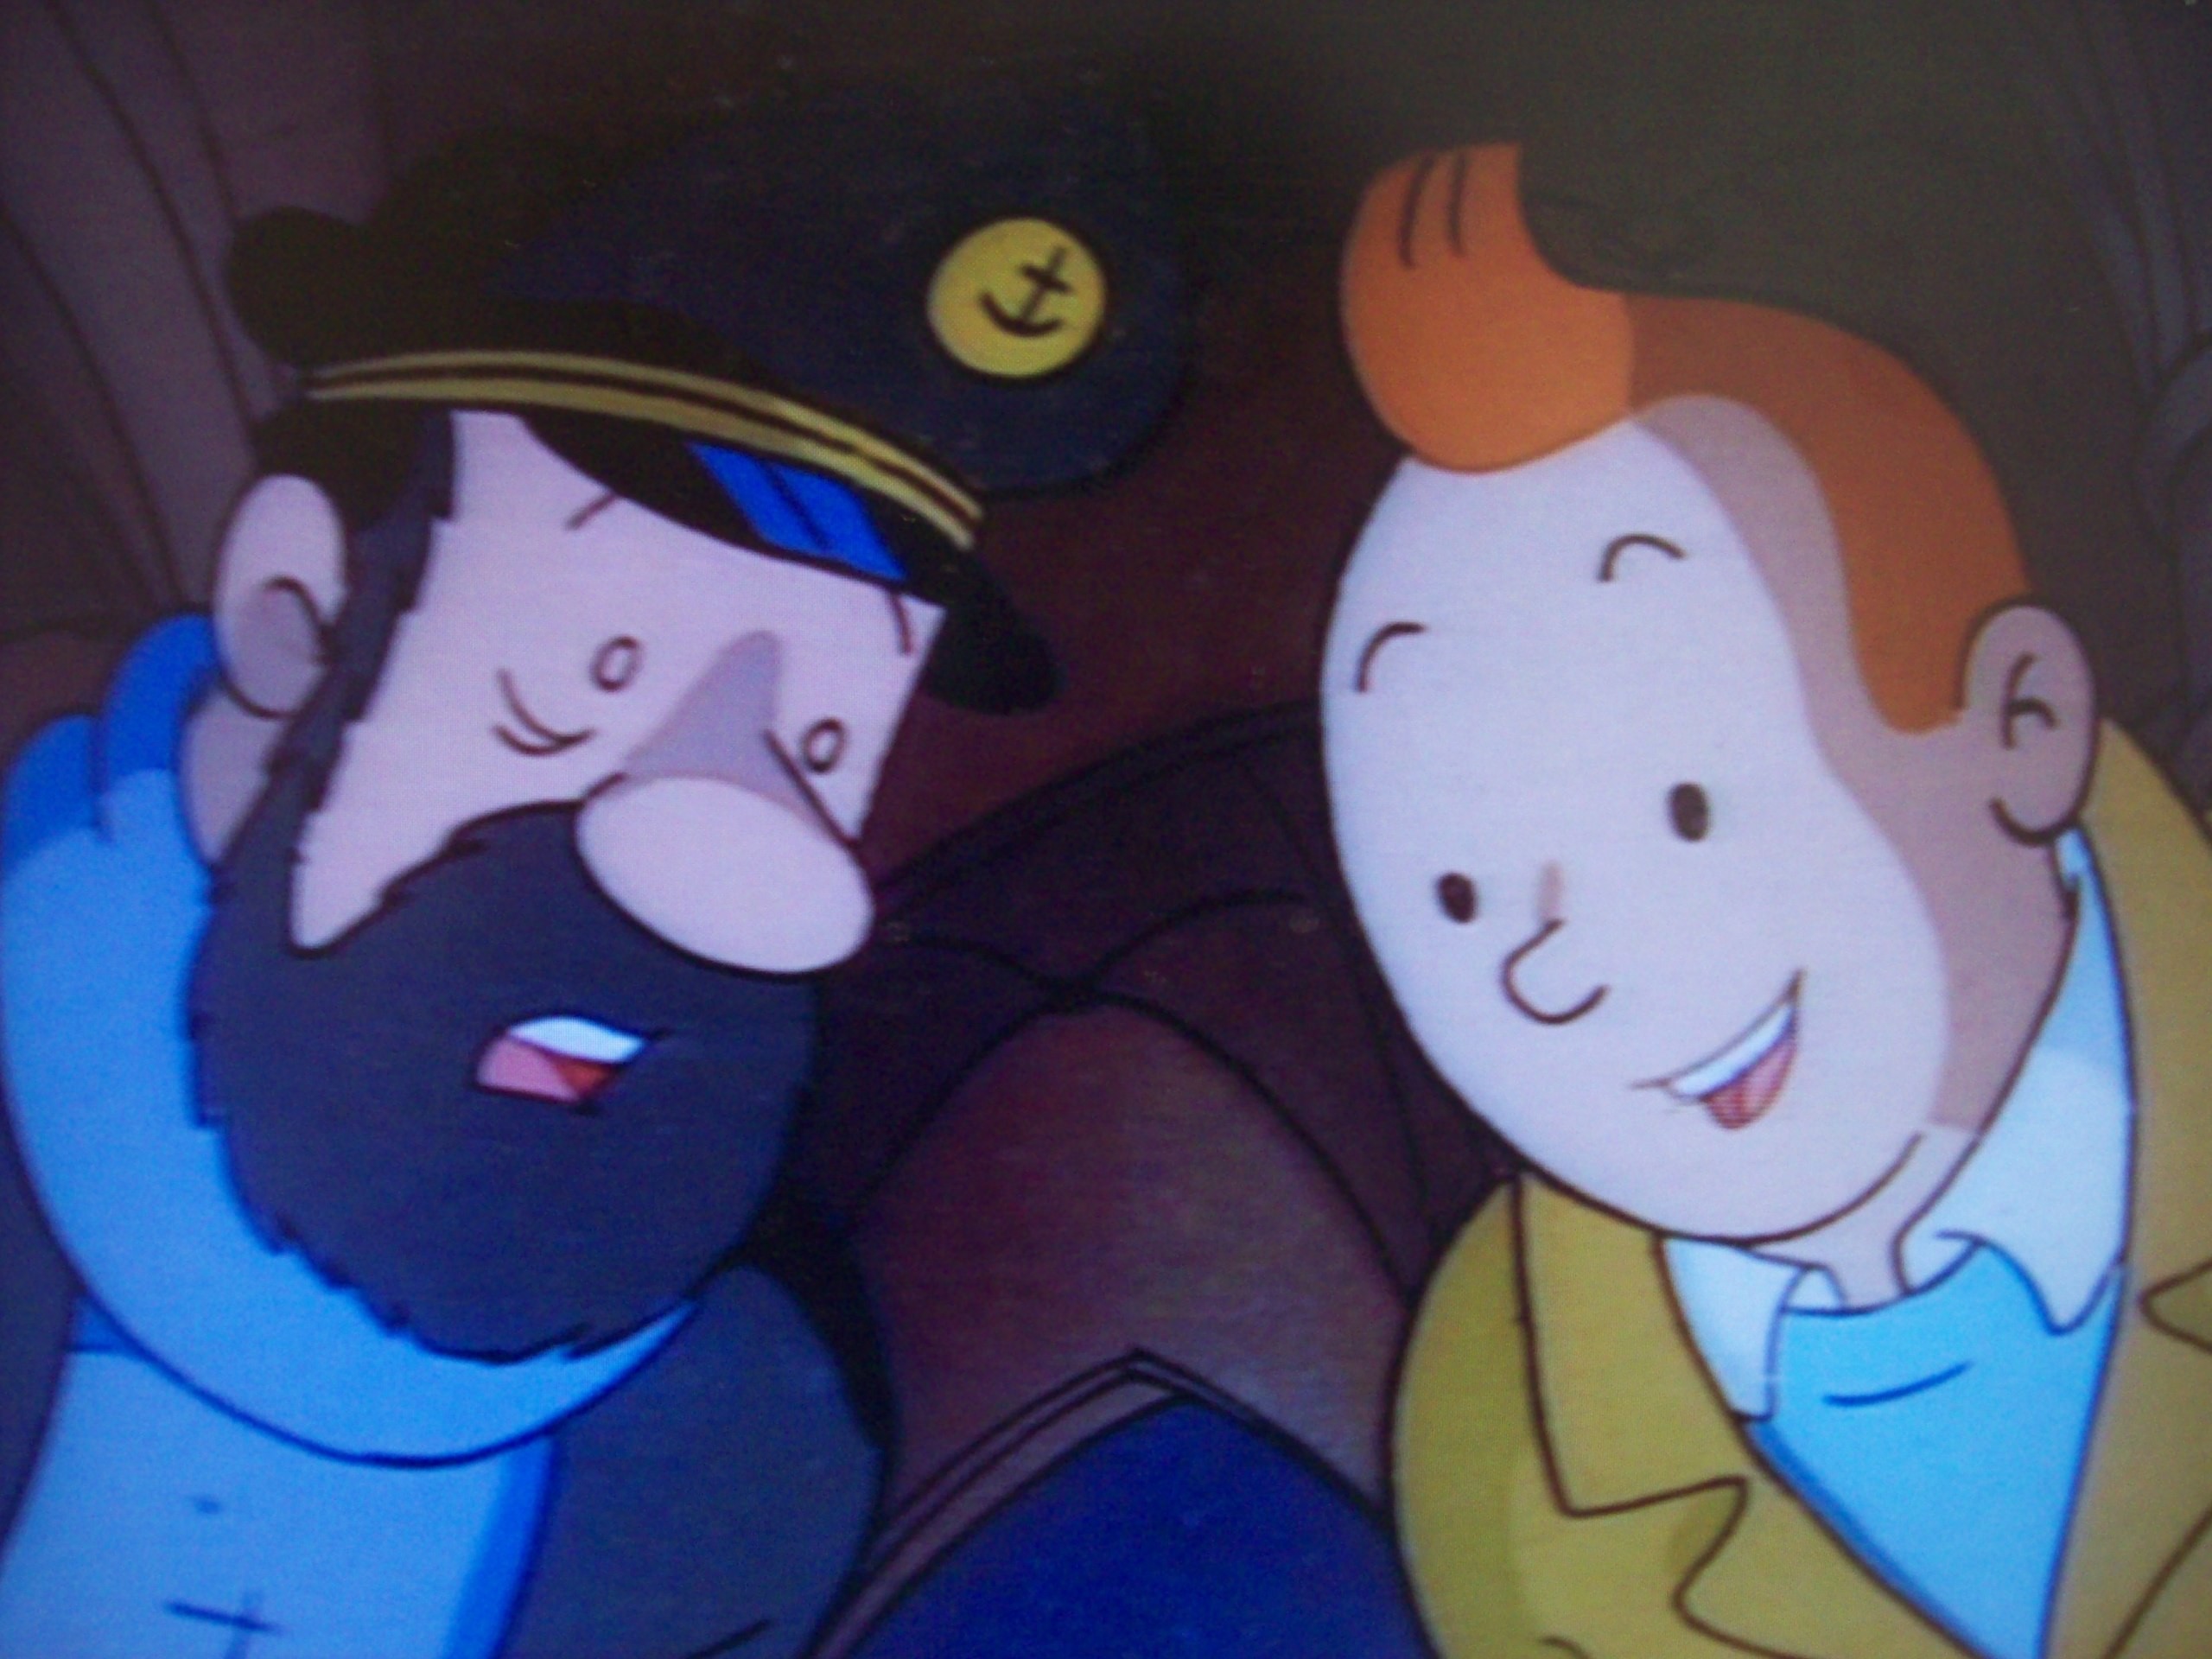 2560x1920 Tintin images Tintin and Haddock HD wallpaper and background photos